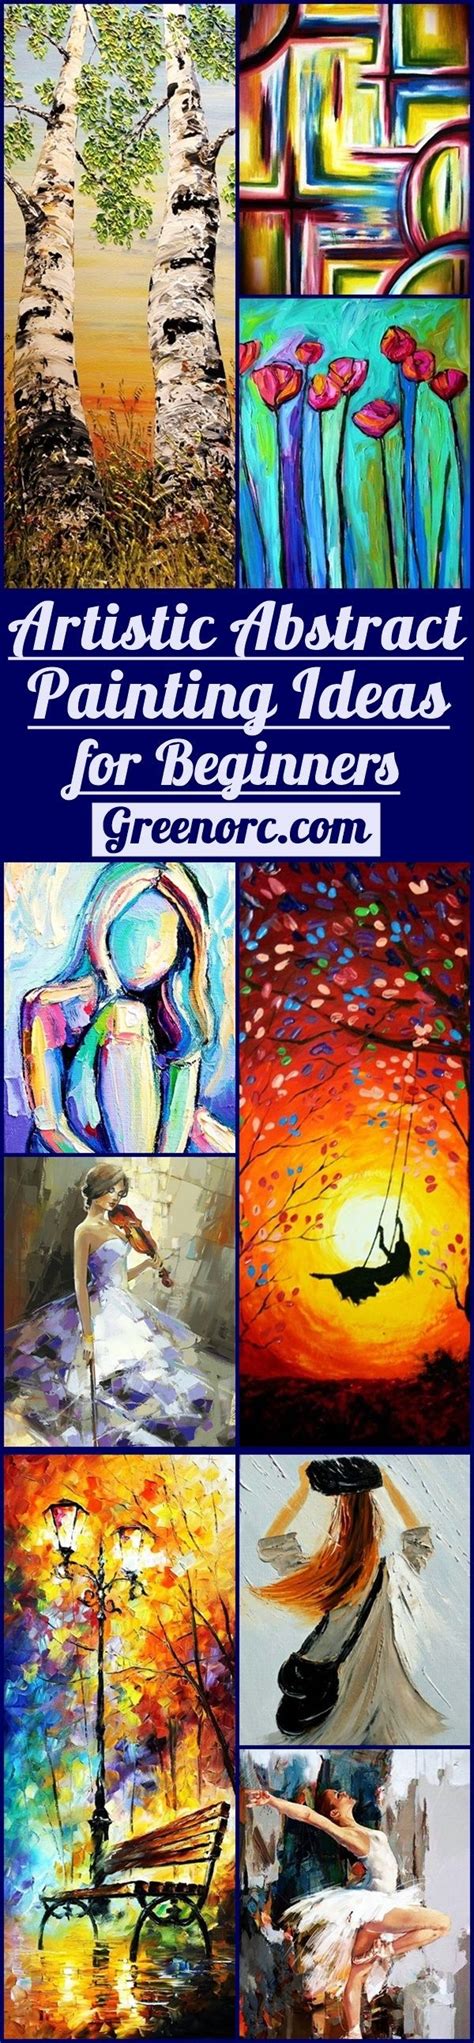 40 Artistic Abstract Painting Ideas For Beginners Greenorc Pinturas